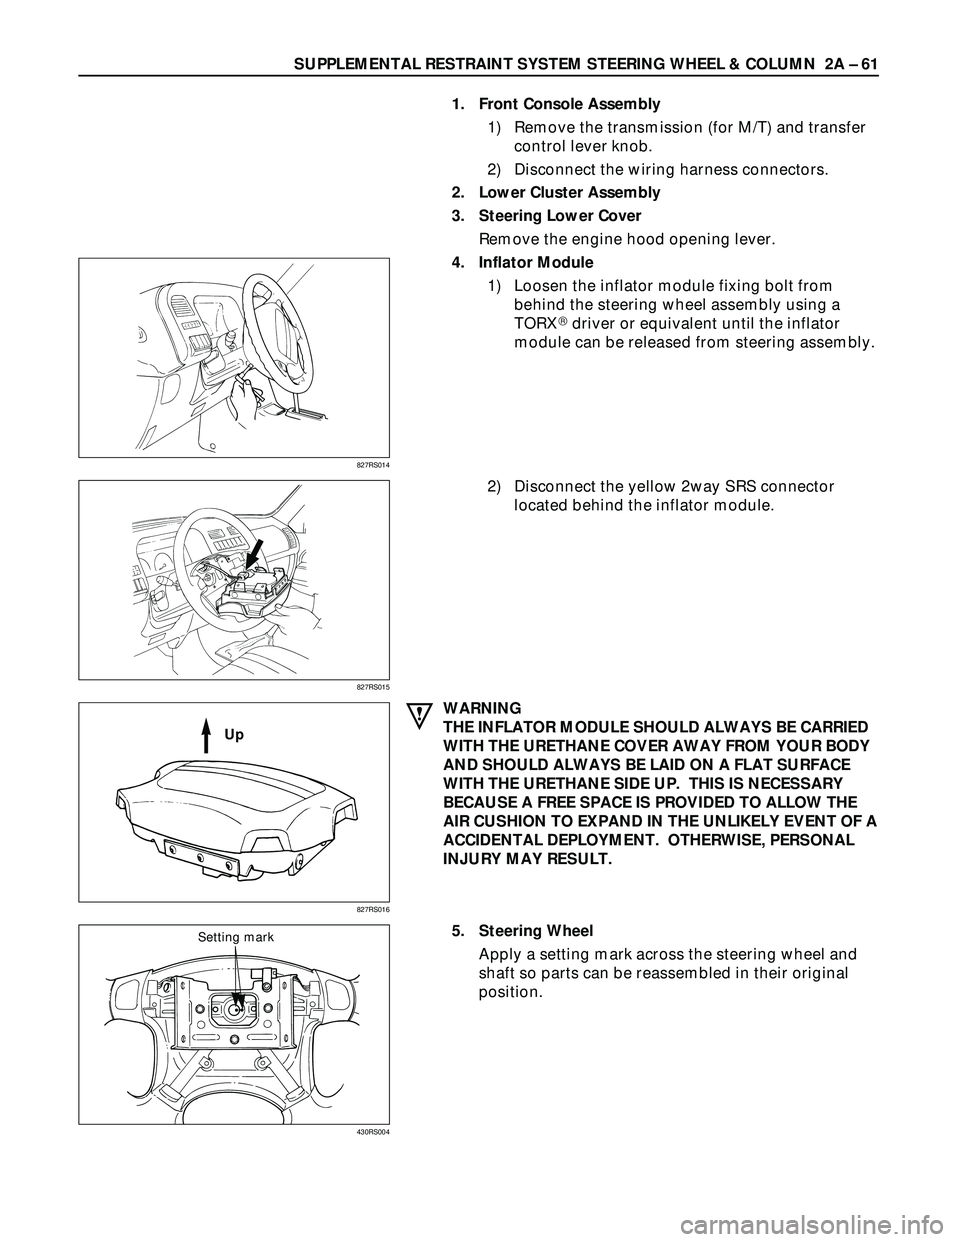 ISUZU TROOPER 1998  Service Repair Manual SUPPLEMENTAL RESTRAINT SYSTEM STEERING WHEEL & COLUMN  2A – 61
1. Front Console Assembly
1) Remove the transmission (for M/T) and transfer
control lever knob.
2) Disconnect the wiring harness connec